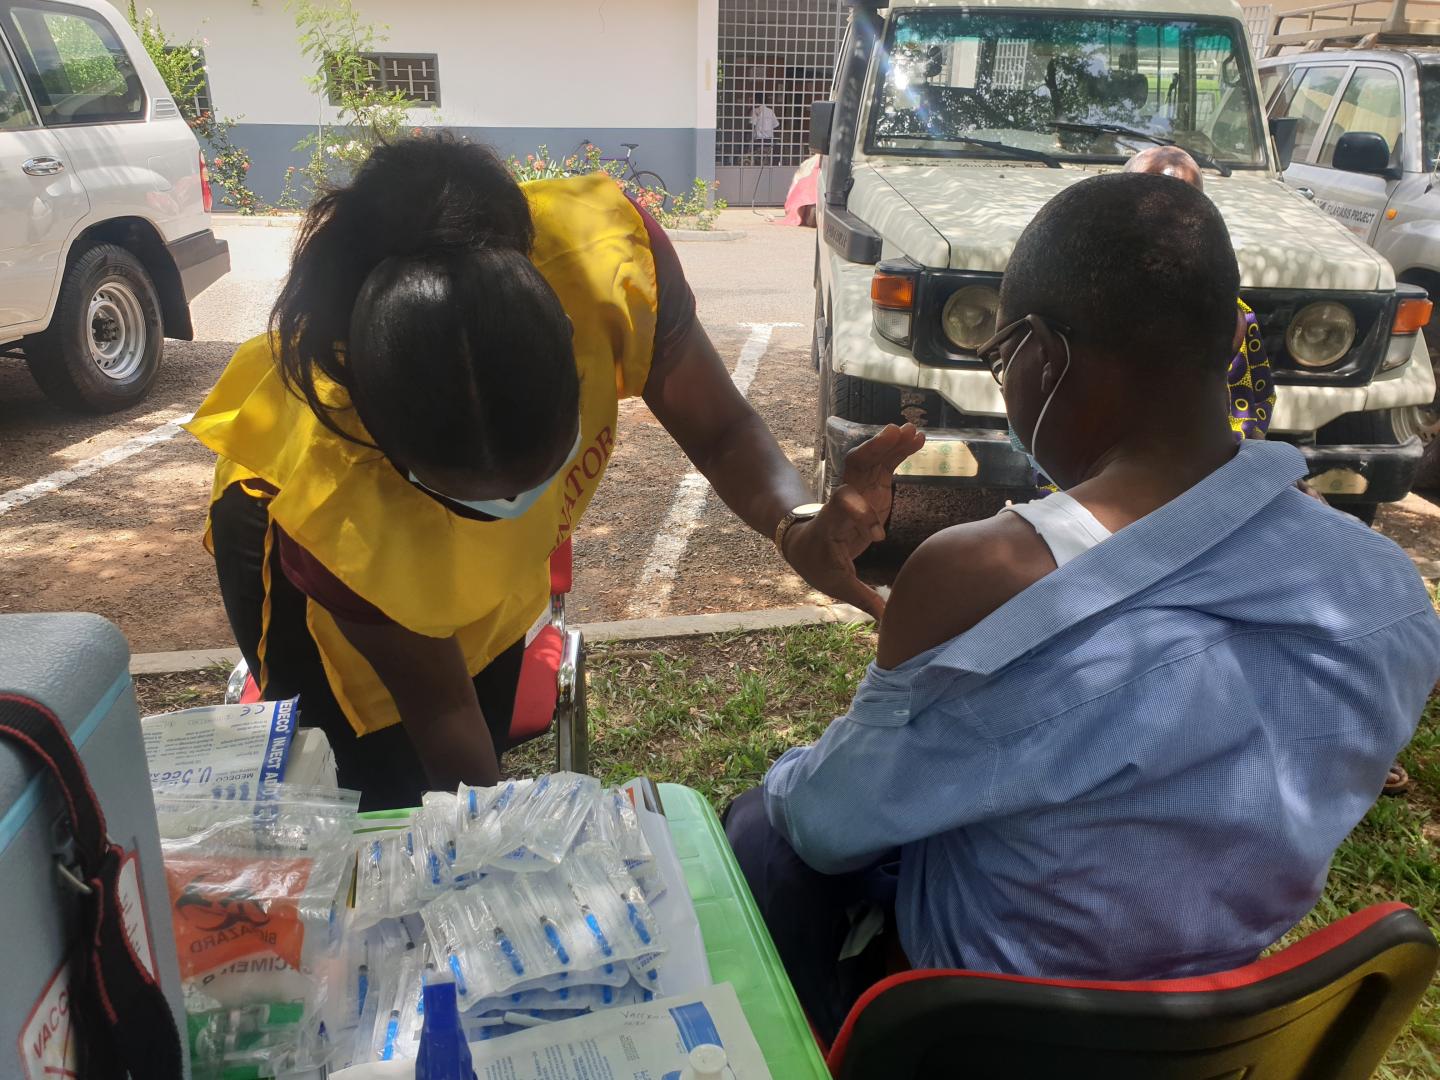 can you travel to ghana without covid vaccine